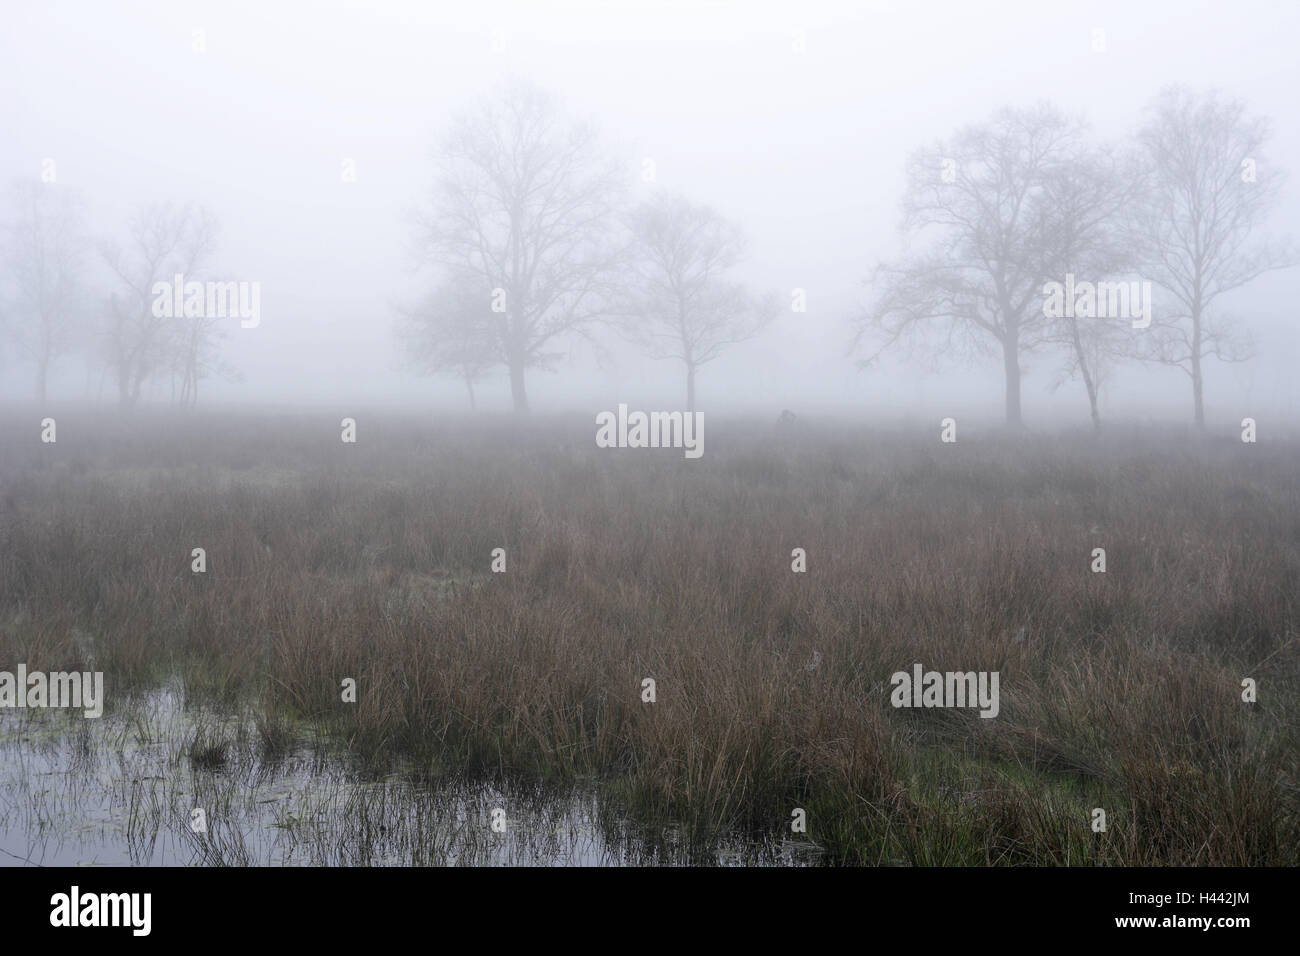 Germany, Lower Saxony, Stoteler Moore, trees, fog, Stotel, Stotelermoor, Moore, marsh, marshy landscape, scenery, nature, nature reserve, wetland, mood, grass, shrubs, haze, morning, rest, silence, opaquely, mysticism, lake, waters, fog patches, hazy, mysteriously, reed, nobody, Stock Photo